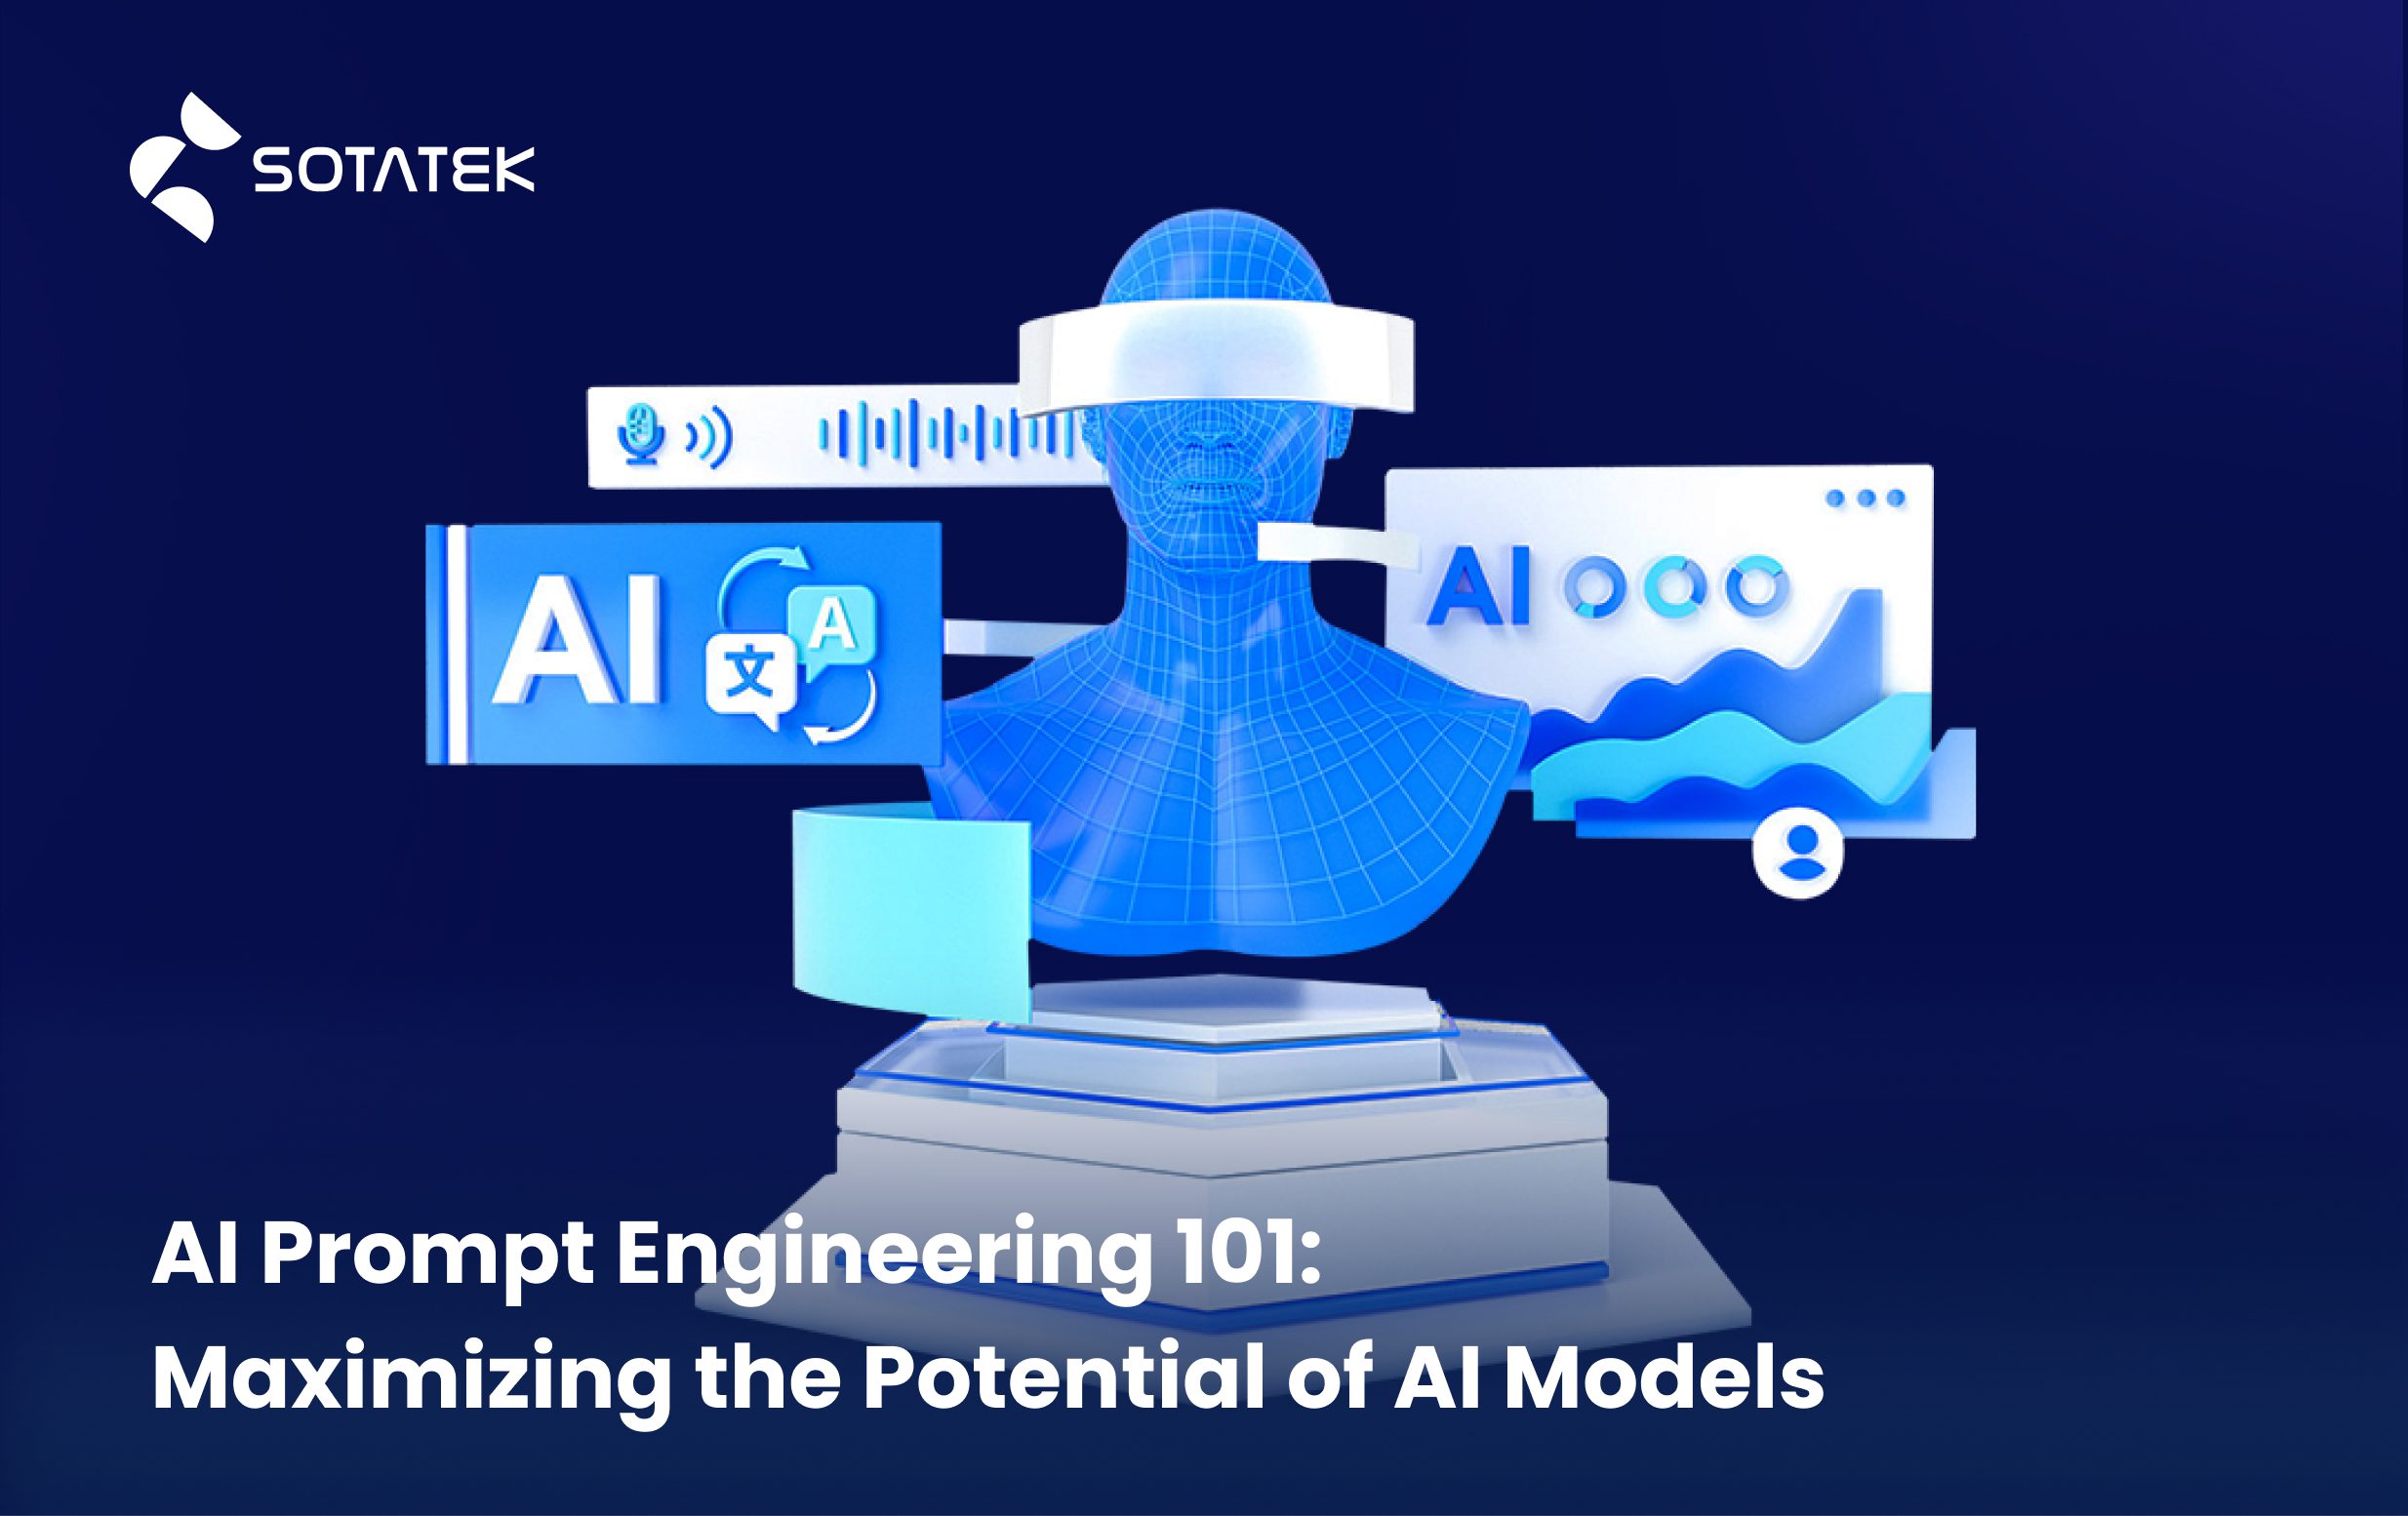 AI Prompt Engineering 101: Maximizing the Potential of AI Models